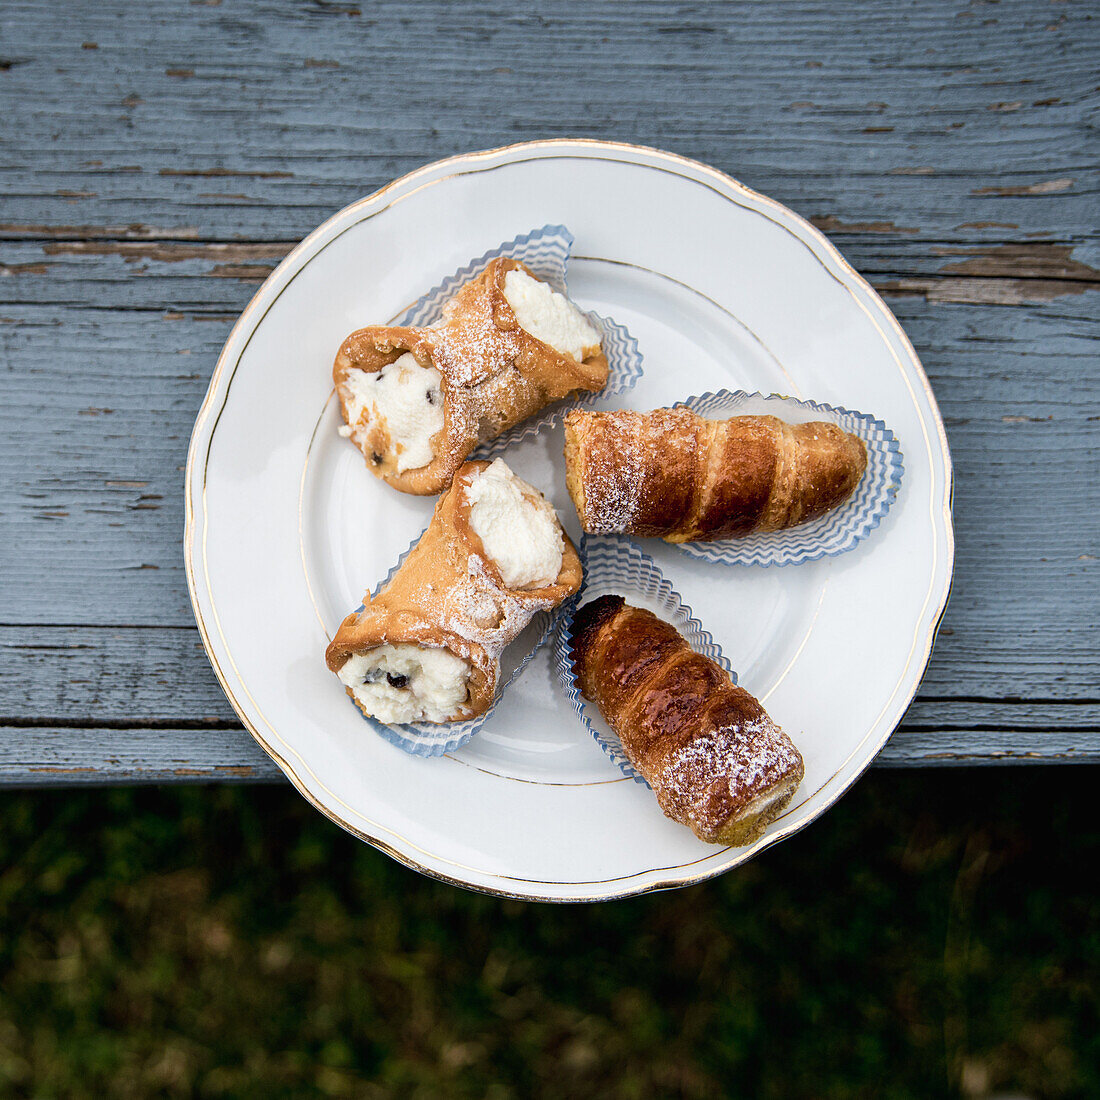 Cannoli - stuffed pastries from Sicily